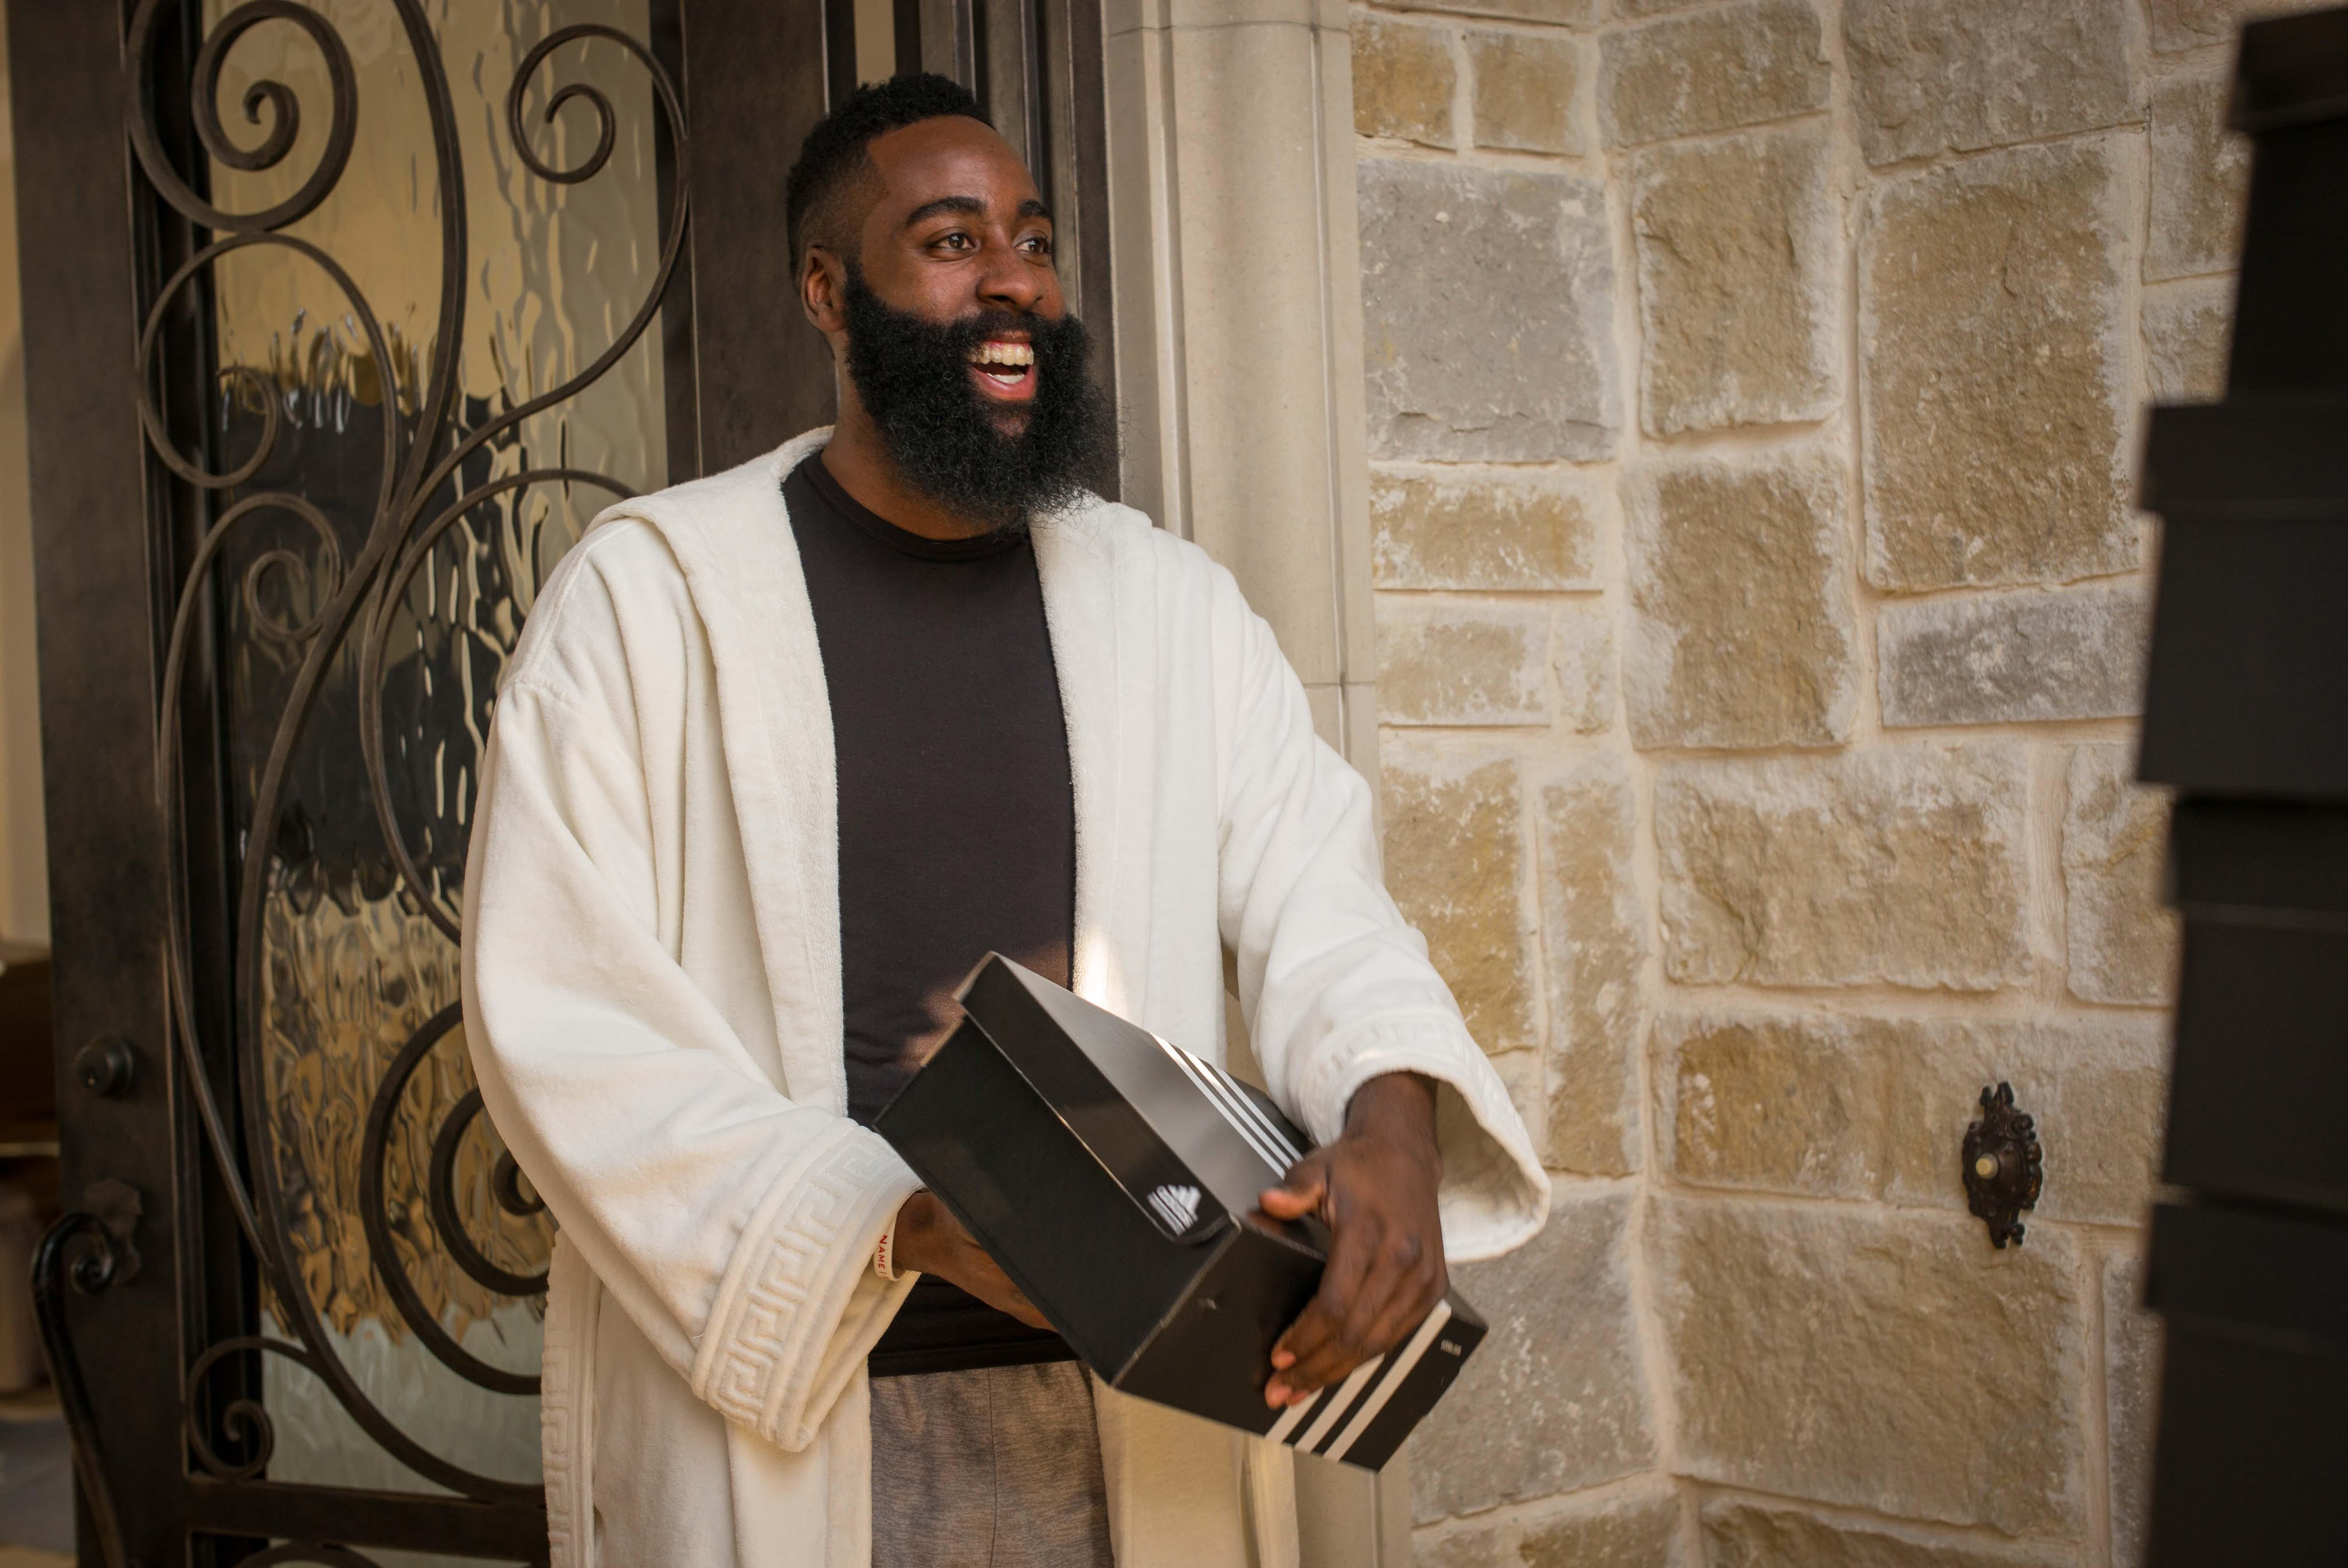 James Harden gets a truck full of Adidas shoes in new commercial